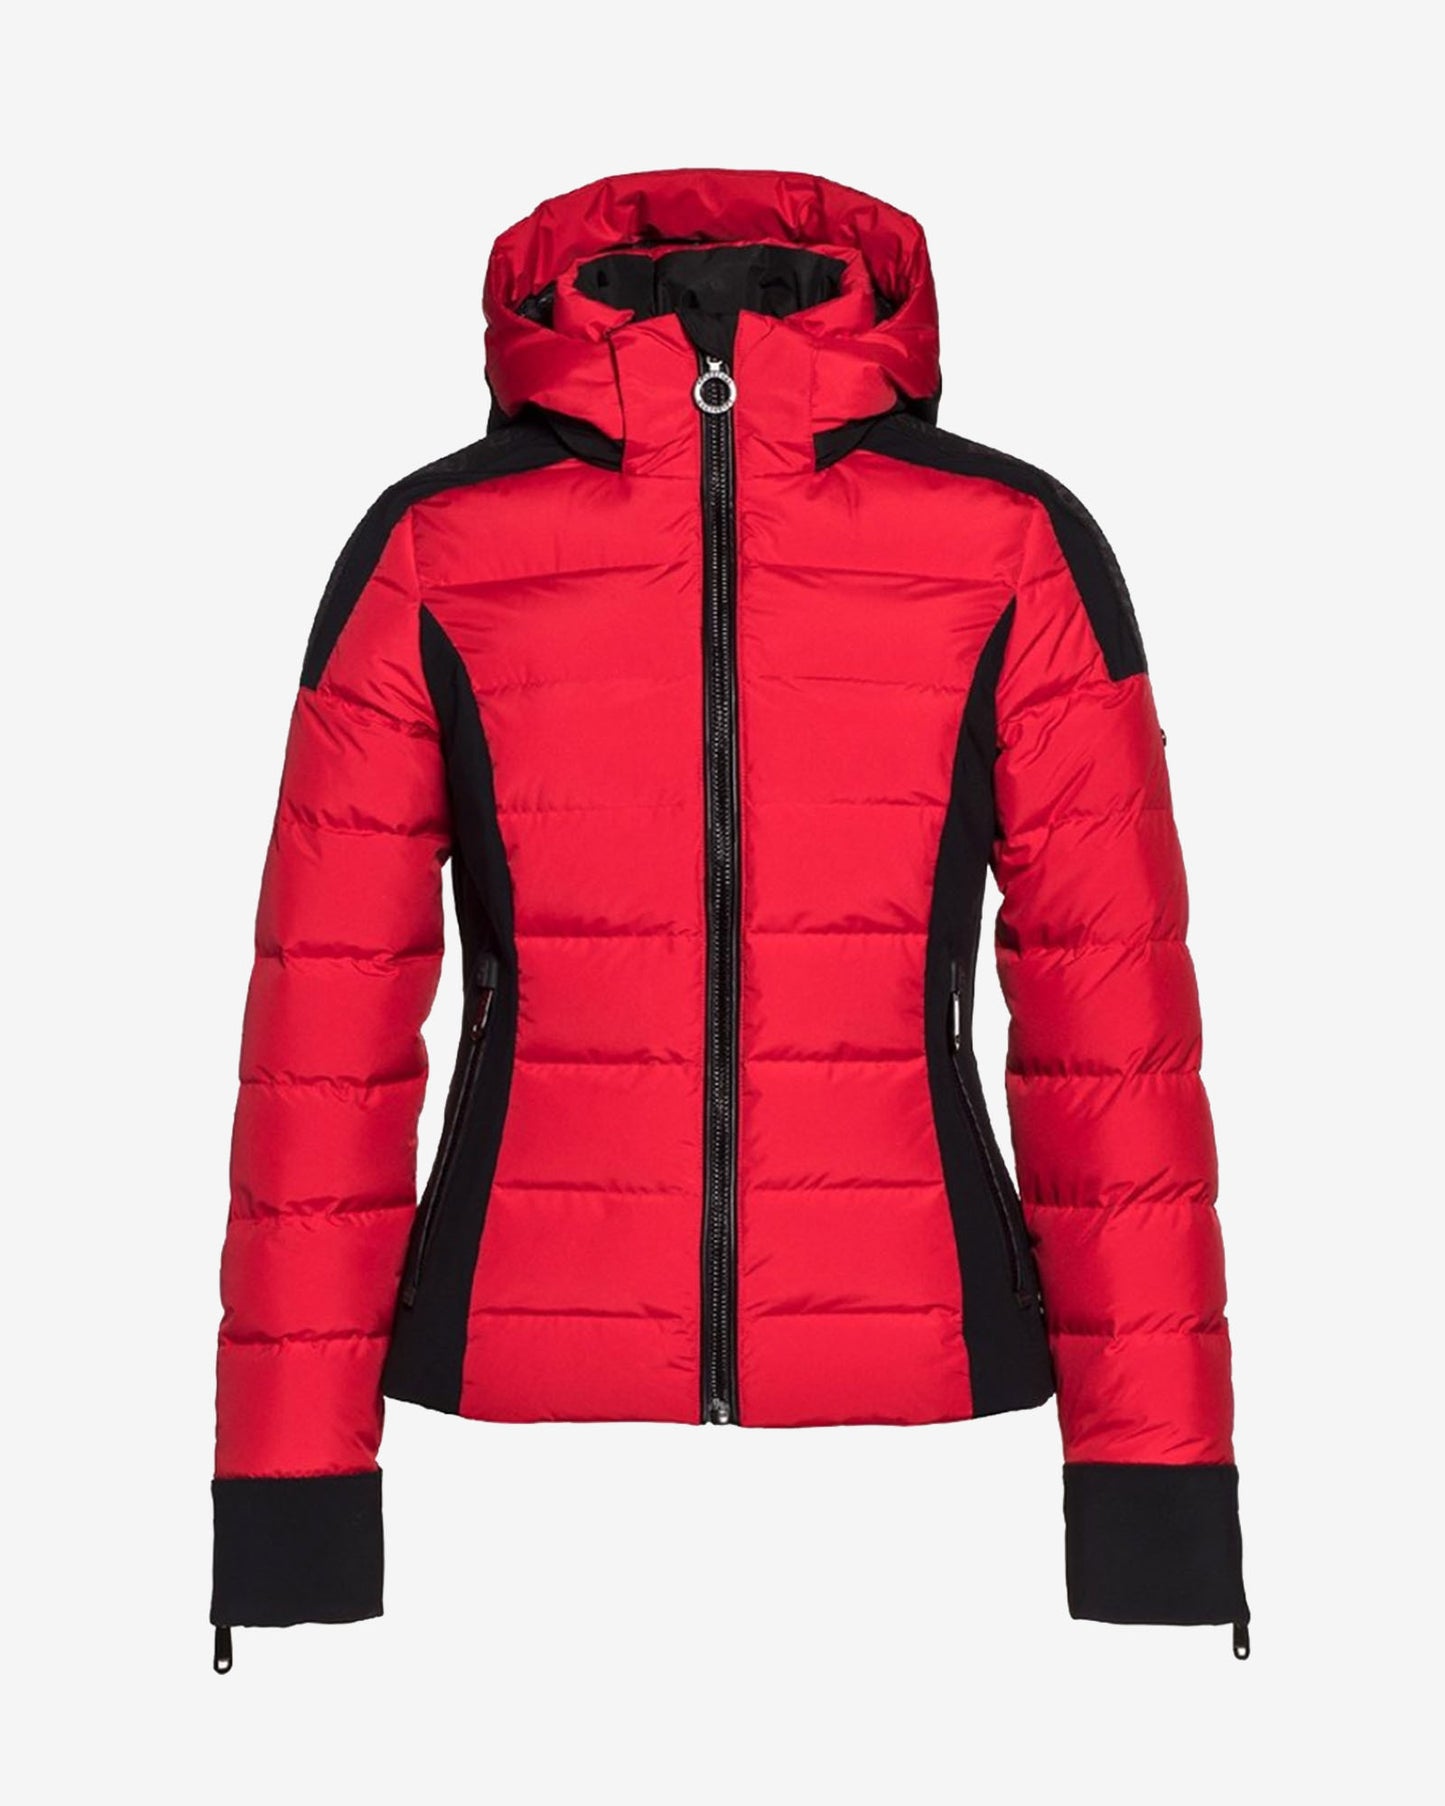 Downfilled Ski Jacket with hood